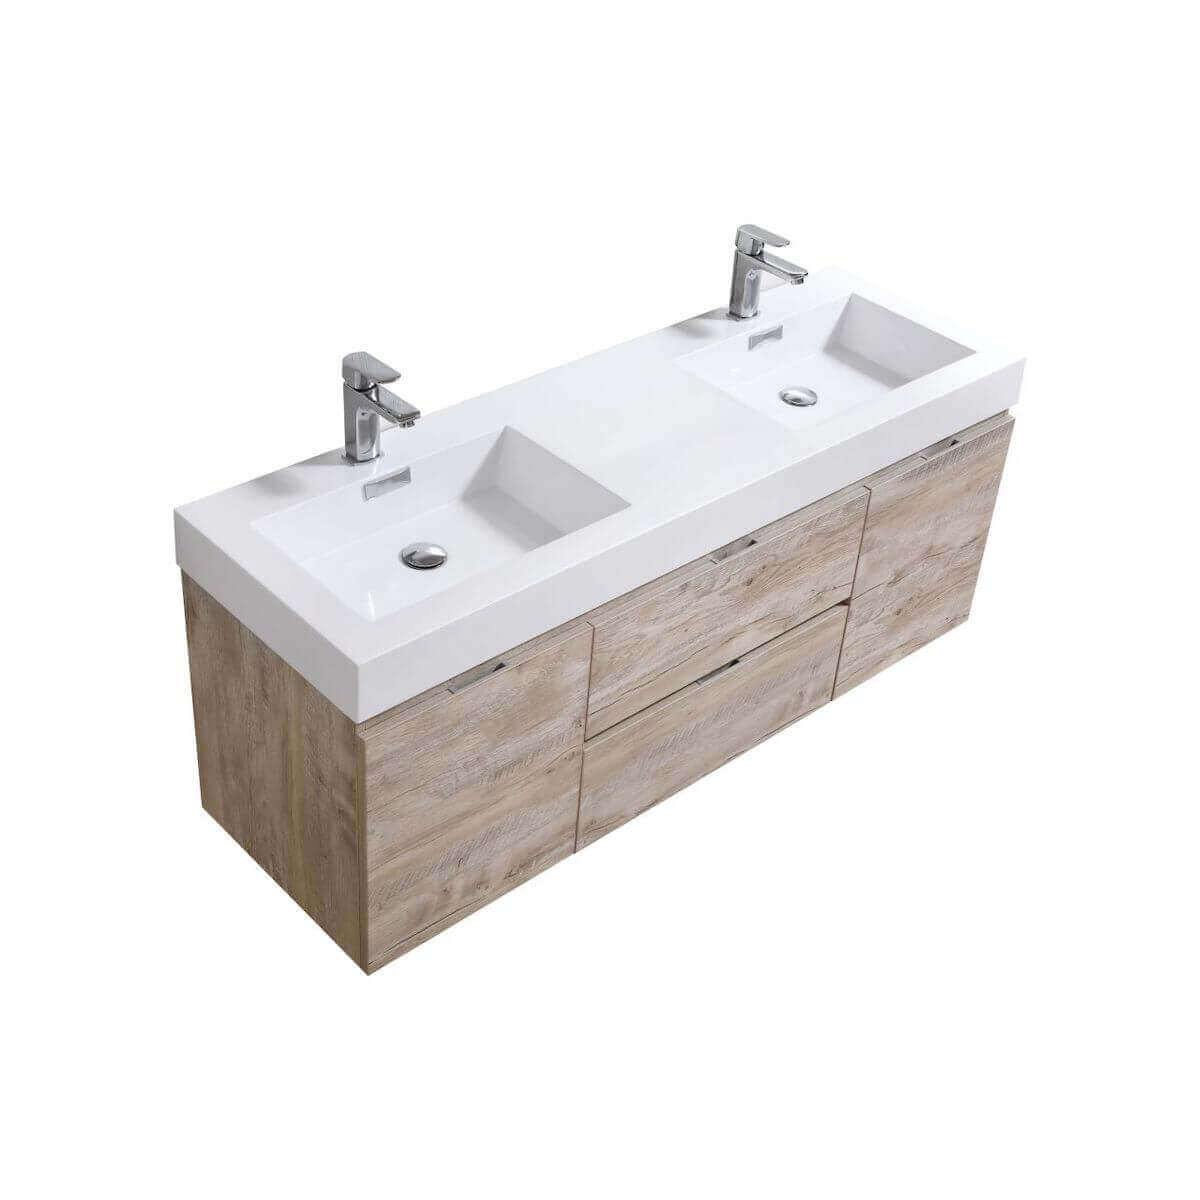 KubeBath Bliss 60" Nature Wood Wall Mount Double Vanity BSL60D-NW #finish_nature wood